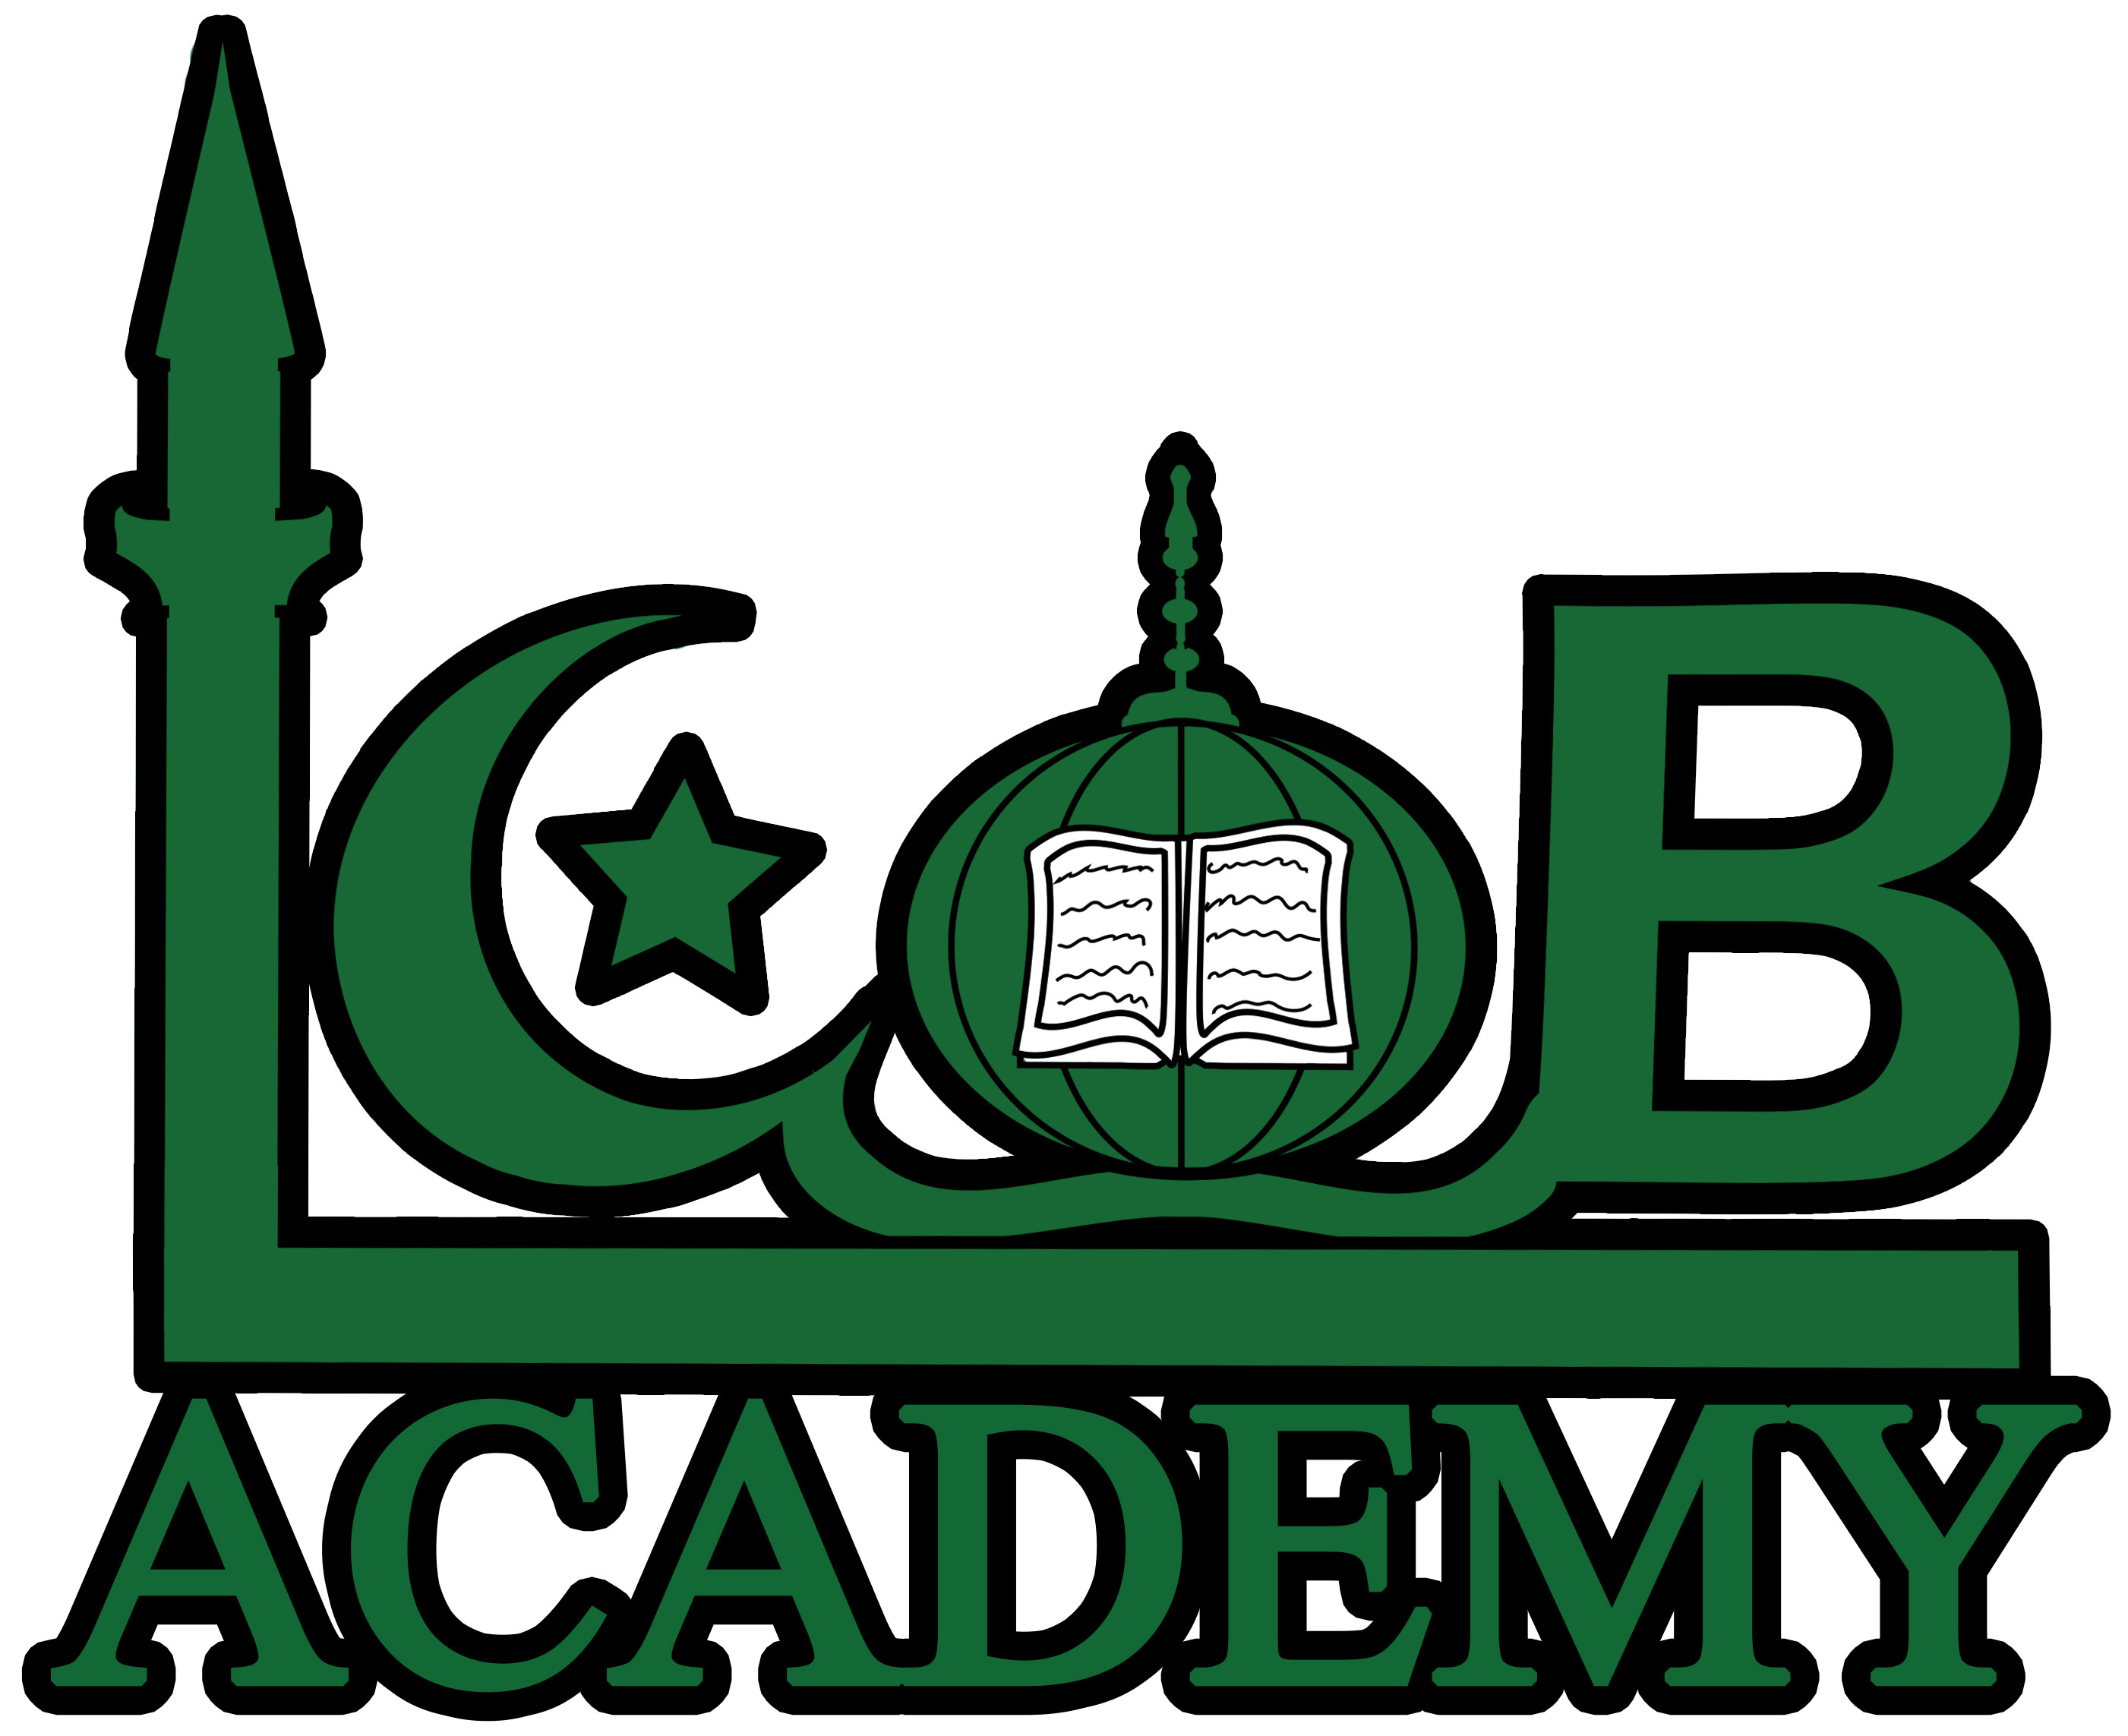 Iteration 2 of Modified logo to be used for the 2013-2014 school year on everything, including official stationary and promotional merchandise
Made in Photoshop